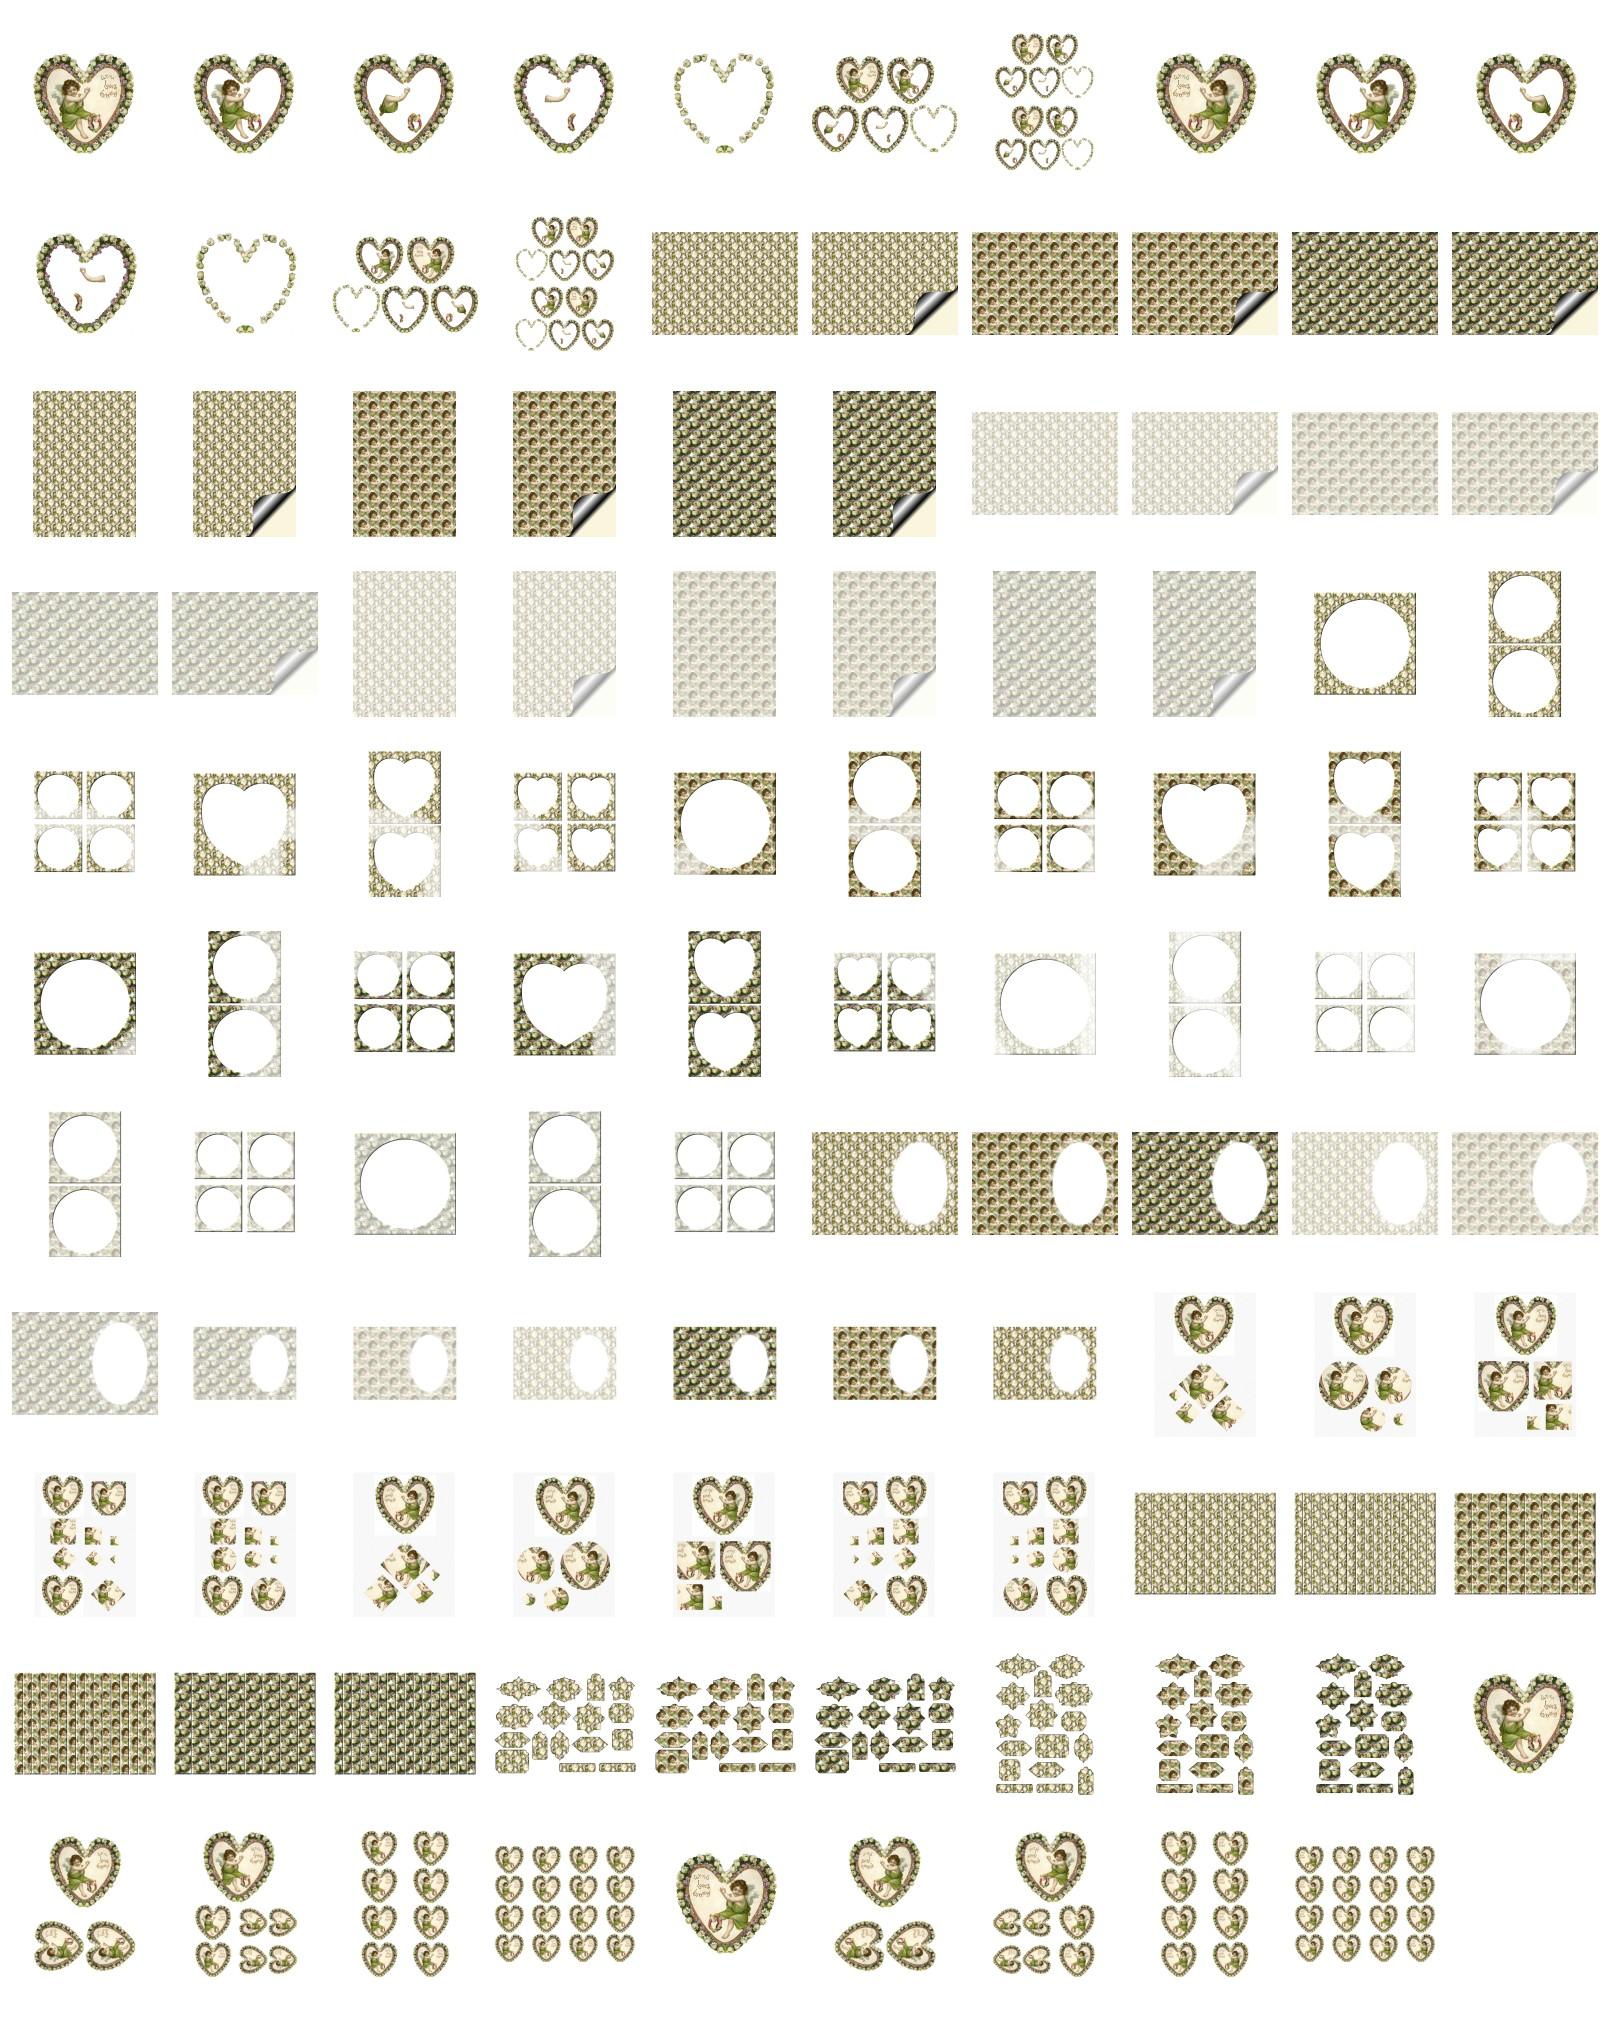 Elegant Hearts Set 09 - 109 pages to DOWNLOAD